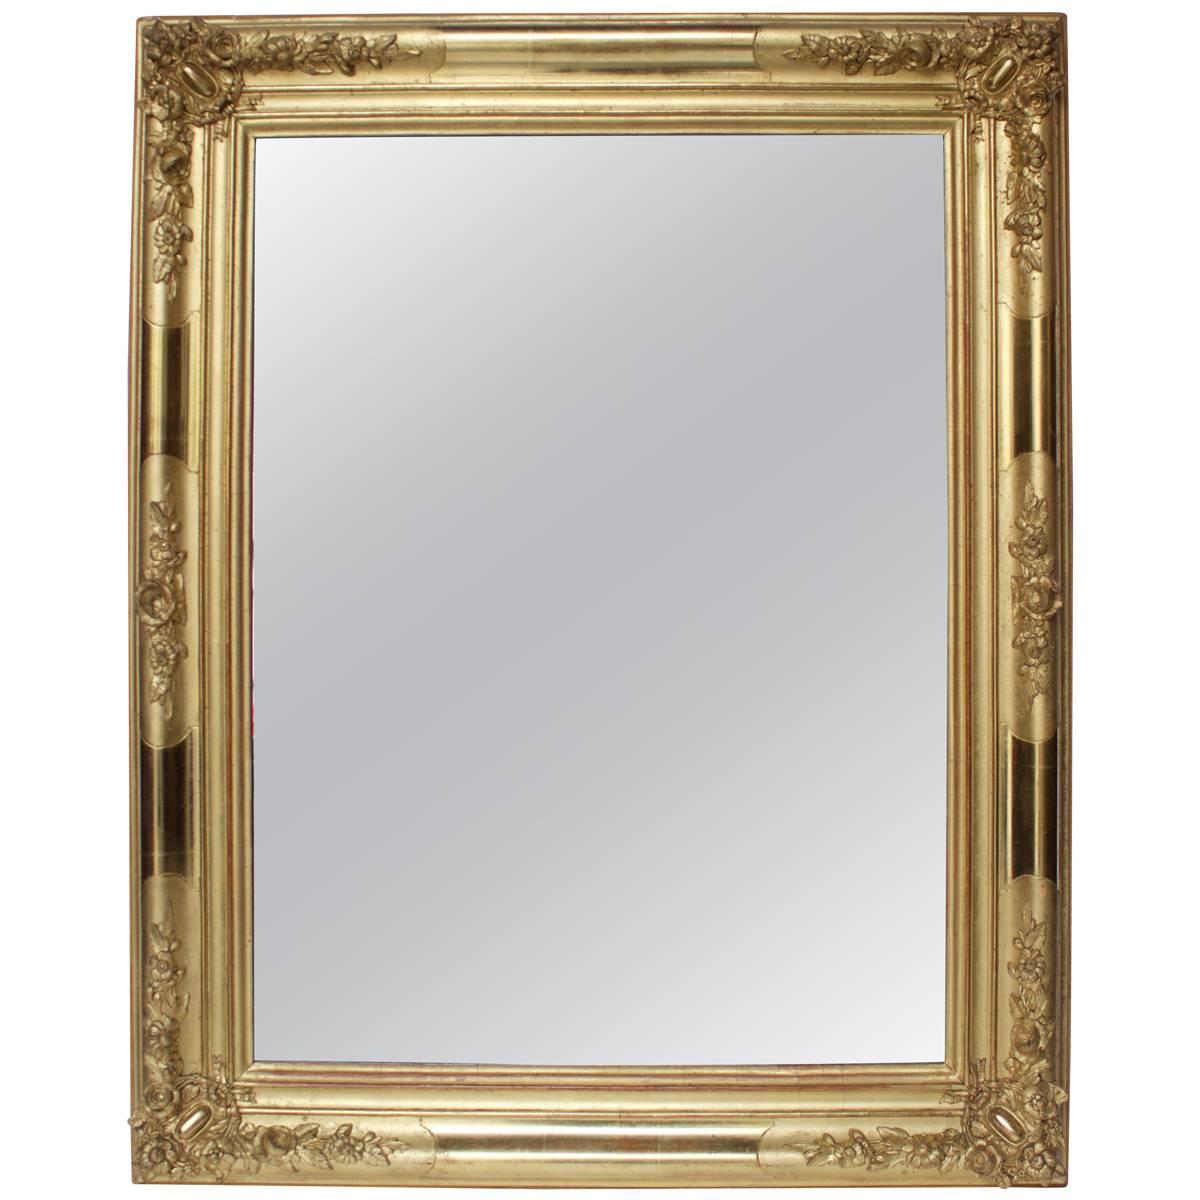 Early 19th Century French Giltwood Mirror For Sale